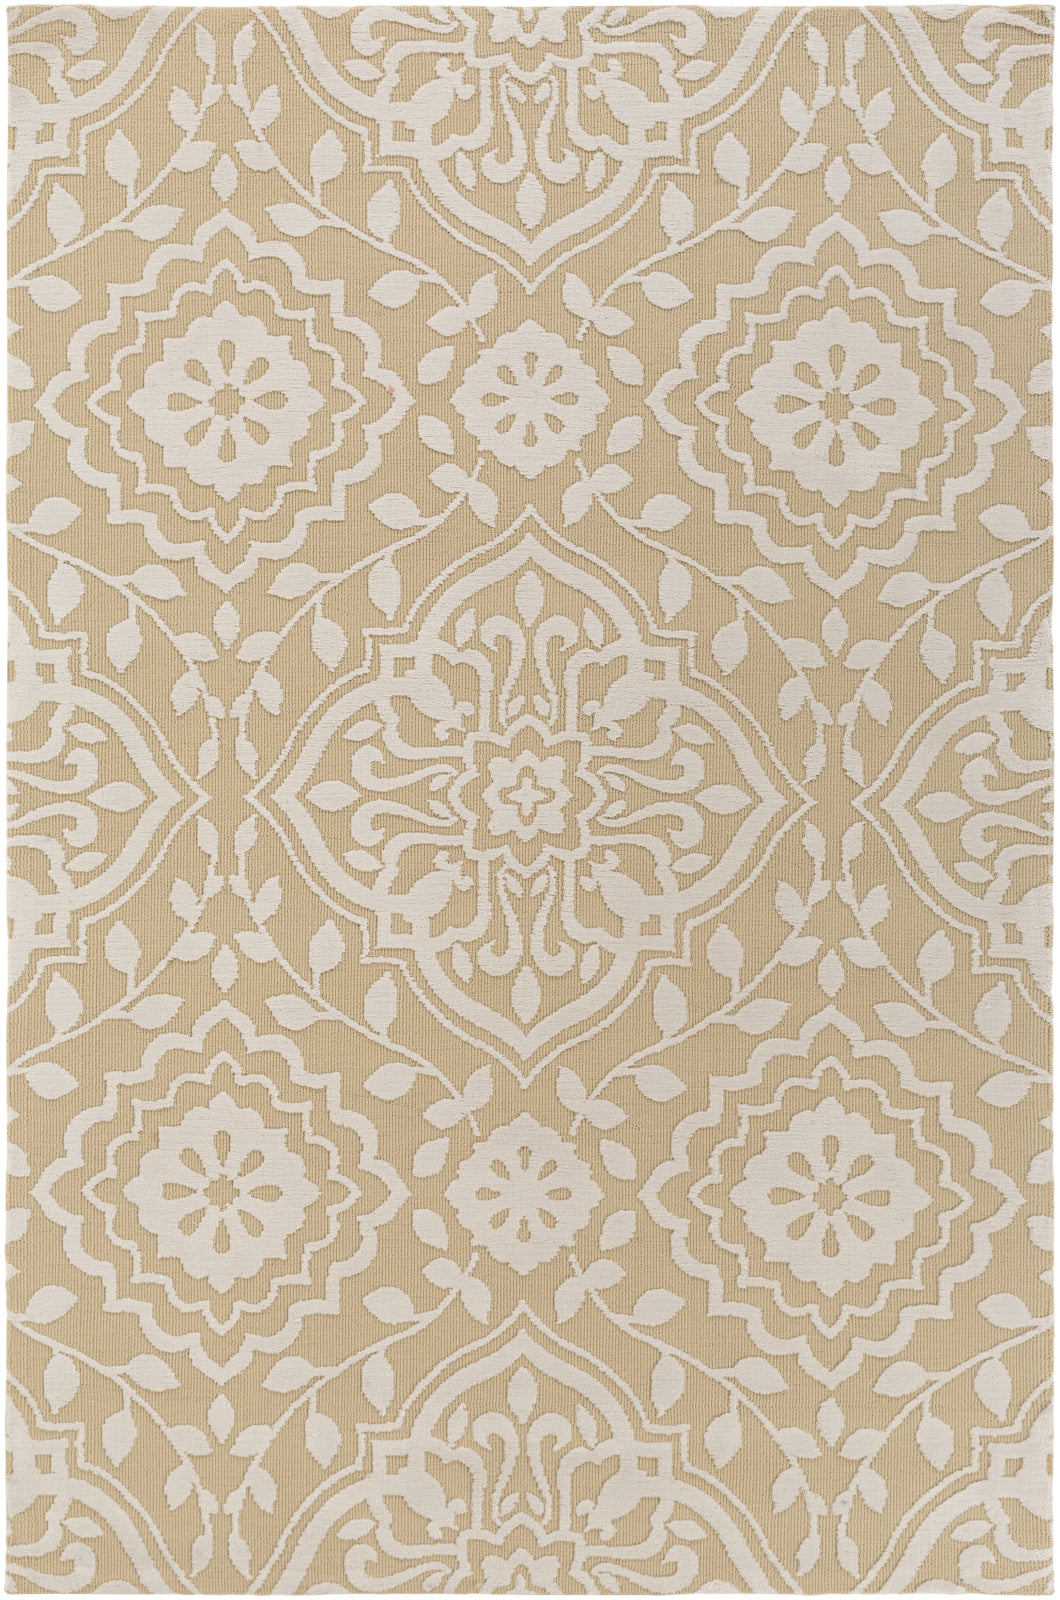 Artistic Weavers Annette Ruby ANE6121 Area Rug main image